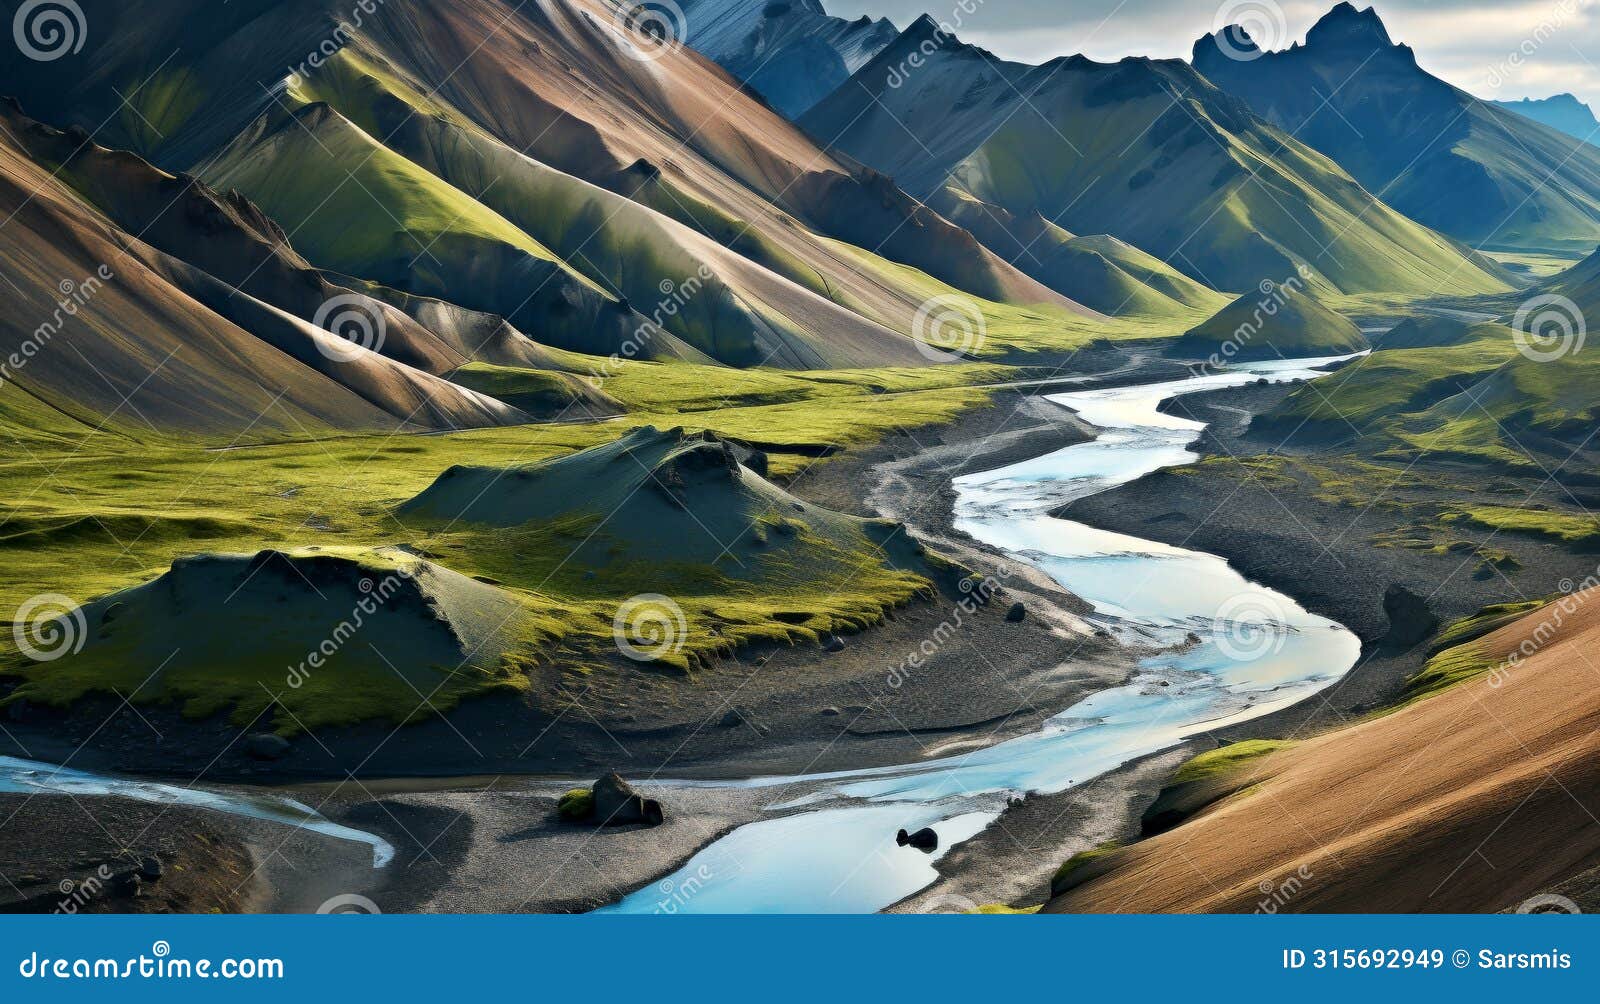 vibrant rhyolite mountains and winding river in iceland. landmannalaugar multicolored rhyolite peaks